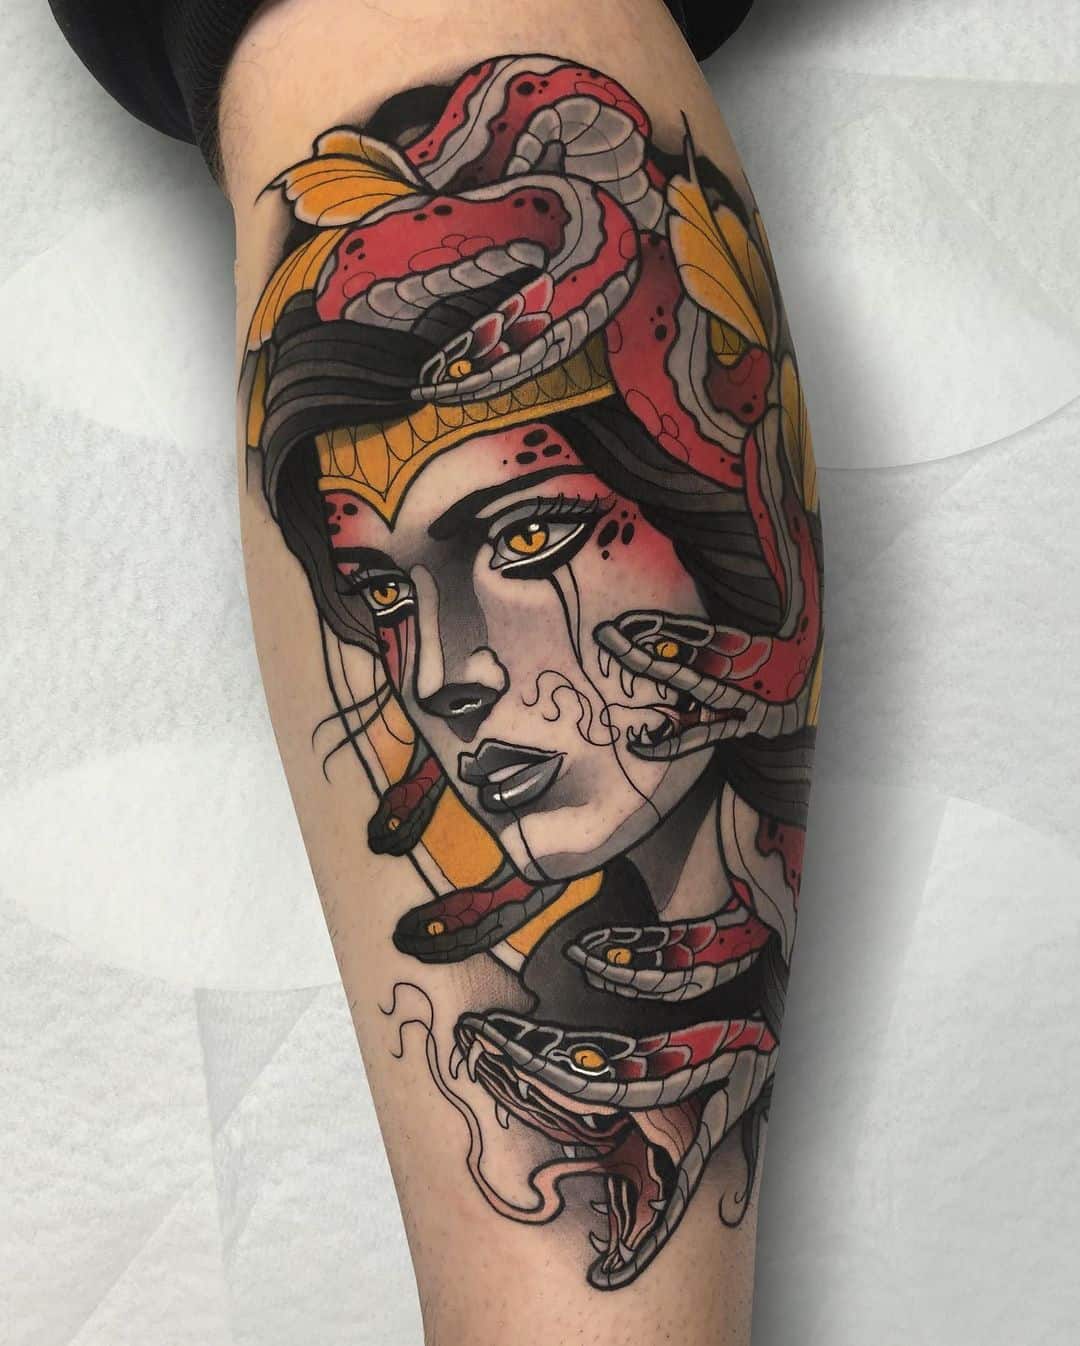 Traditional tattoo funs here 10 ideas for traditional Medusa tattoo